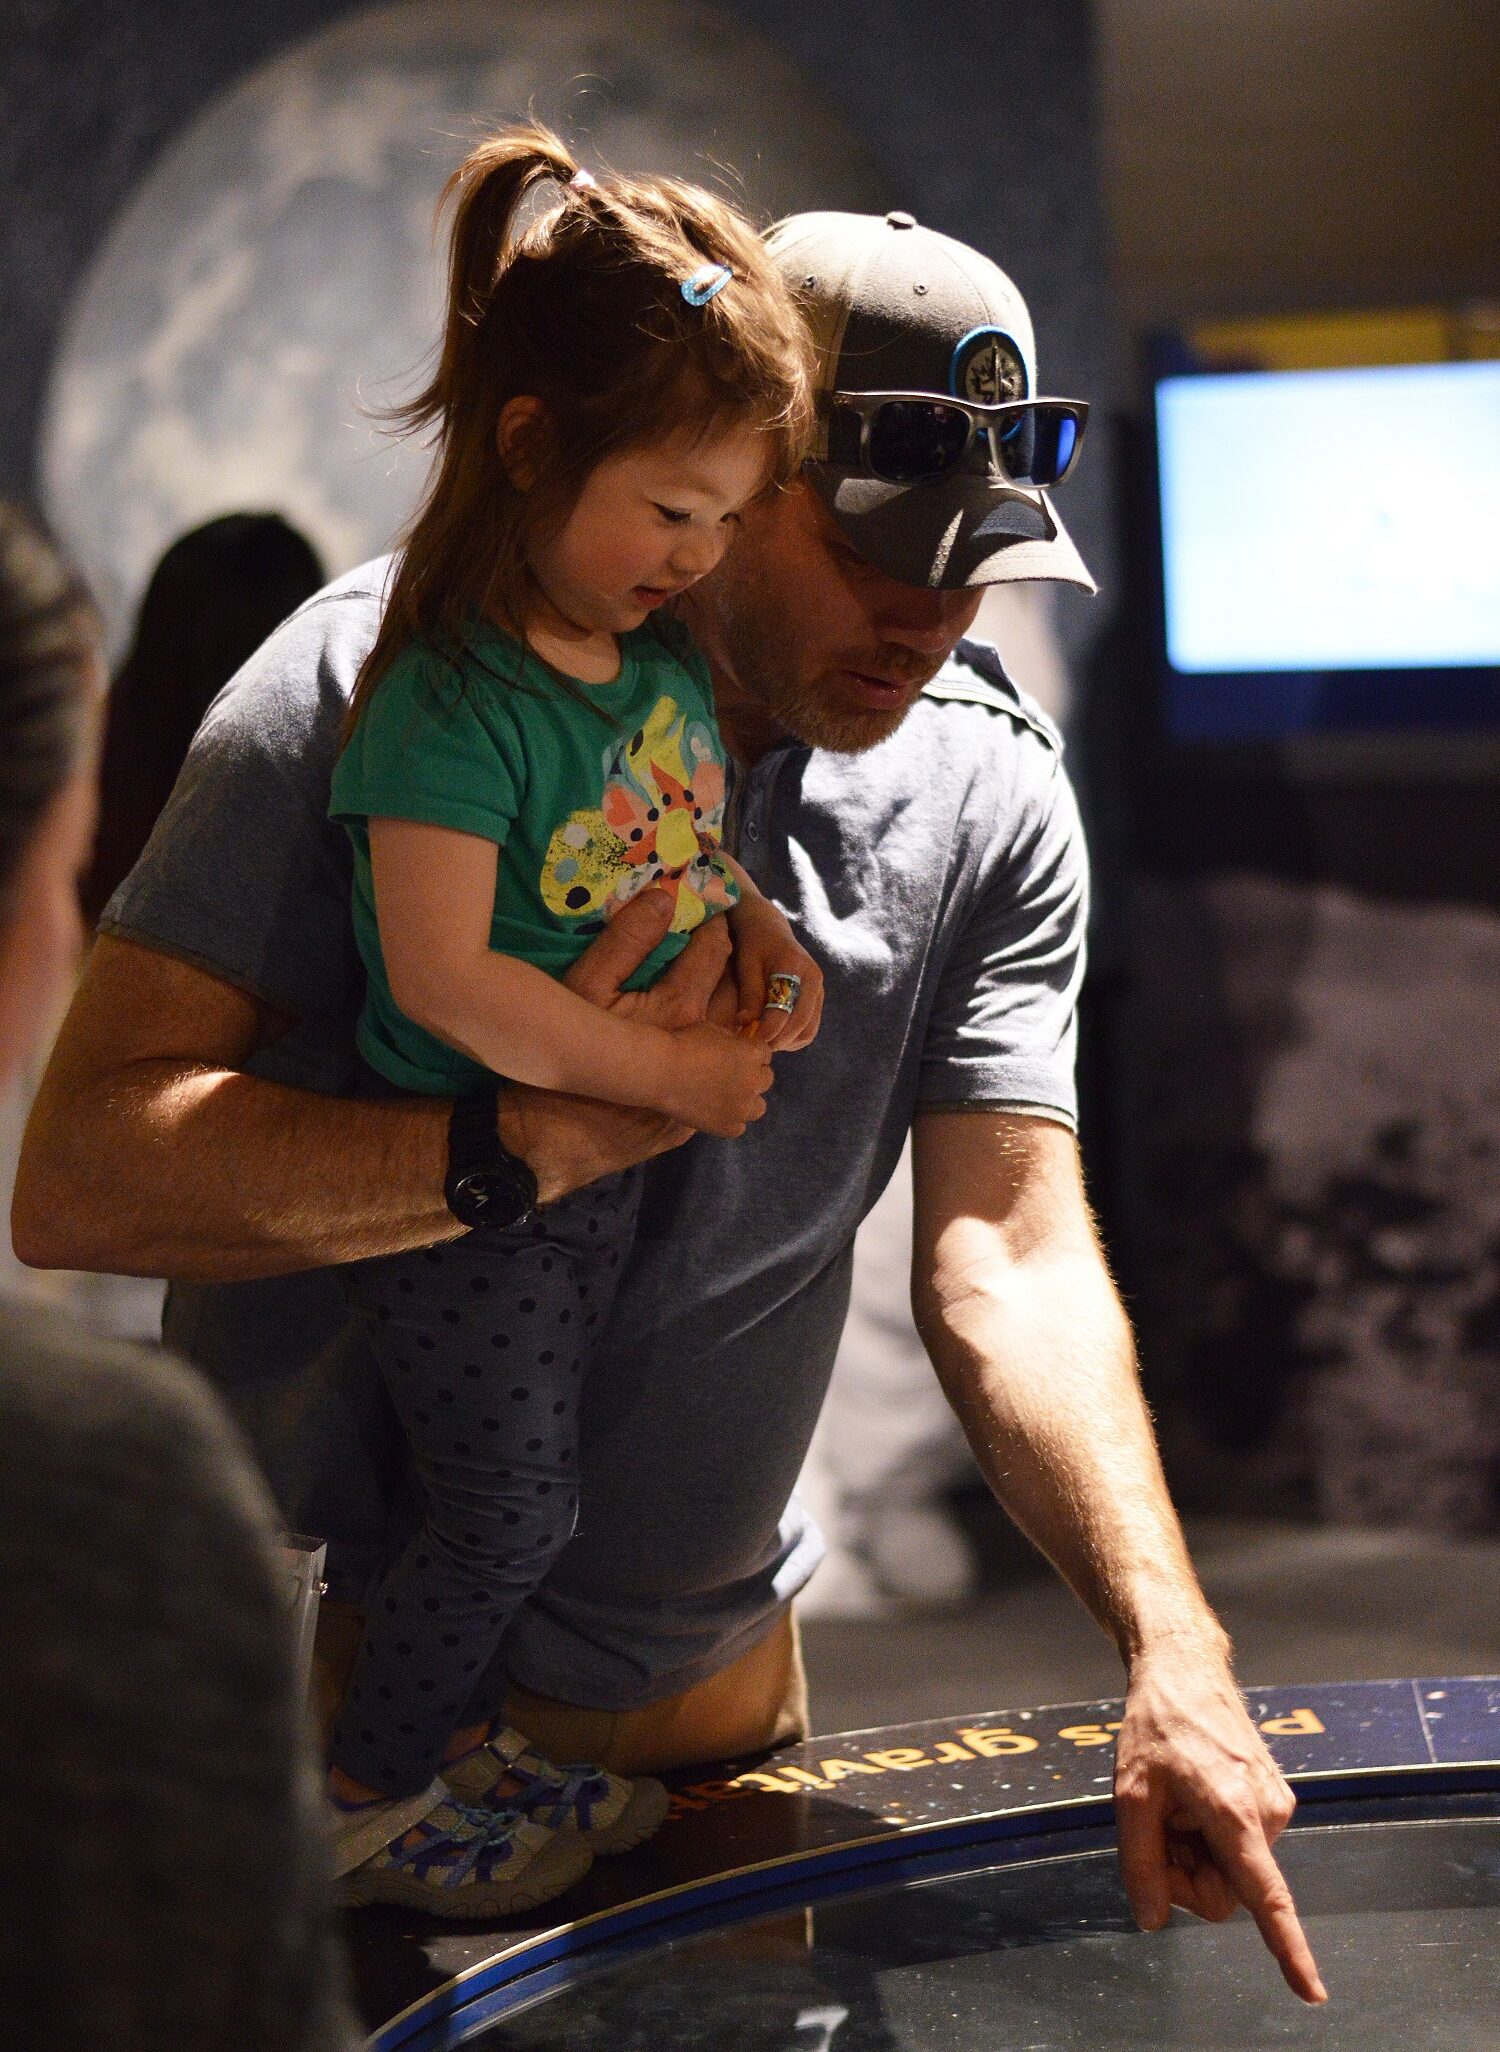 An adult holding a young child as they engage in an exhibit in the Manitoba Museum Science Gallery.